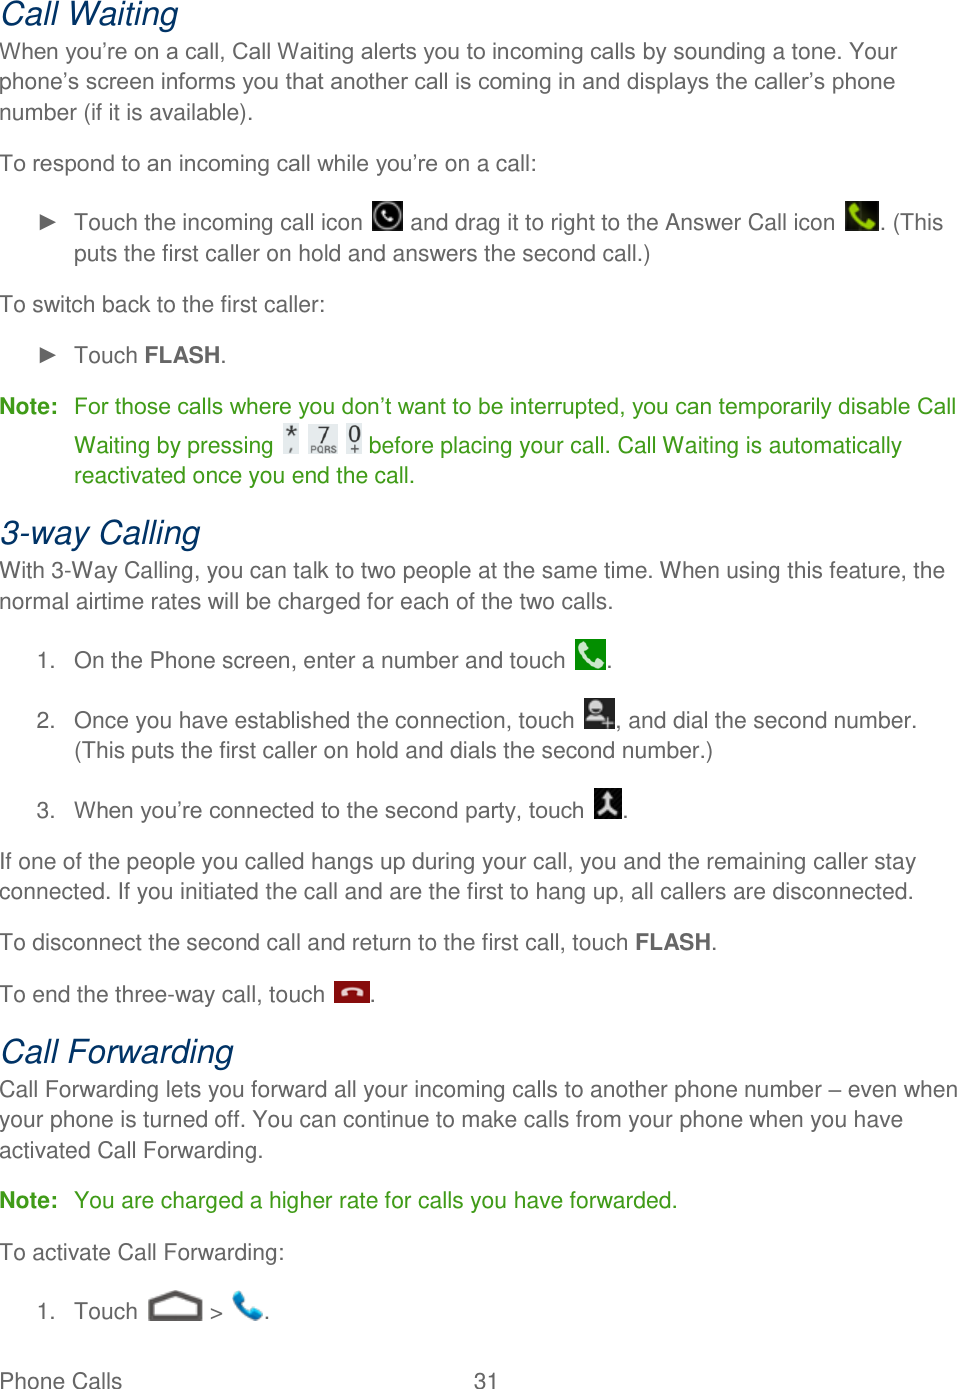 Phone Calls  31   Call Waiting When you’re on a call, Call Waiting alerts you to incoming calls by sounding a tone. Your phone’s screen informs you that another call is coming in and displays the caller’s phone number (if it is available). To respond to an incoming call while you’re on a call: ►  Touch the incoming call icon   and drag it to right to the Answer Call icon  . (This puts the first caller on hold and answers the second call.) To switch back to the first caller: ►  Touch FLASH. Note:  For those calls where you don’t want to be interrupted, you can temporarily disable Call Waiting by pressing       before placing your call. Call Waiting is automatically reactivated once you end the call. 3-way Calling With 3-Way Calling, you can talk to two people at the same time. When using this feature, the normal airtime rates will be charged for each of the two calls. 1.  On the Phone screen, enter a number and touch  . 2.  Once you have established the connection, touch  , and dial the second number. (This puts the first caller on hold and dials the second number.) 3. When you’re connected to the second party, touch  . If one of the people you called hangs up during your call, you and the remaining caller stay connected. If you initiated the call and are the first to hang up, all callers are disconnected. To disconnect the second call and return to the first call, touch FLASH. To end the three-way call, touch  . Call Forwarding Call Forwarding lets you forward all your incoming calls to another phone number – even when your phone is turned off. You can continue to make calls from your phone when you have activated Call Forwarding. Note:  You are charged a higher rate for calls you have forwarded. To activate Call Forwarding: 1.  Touch   &gt;  . 